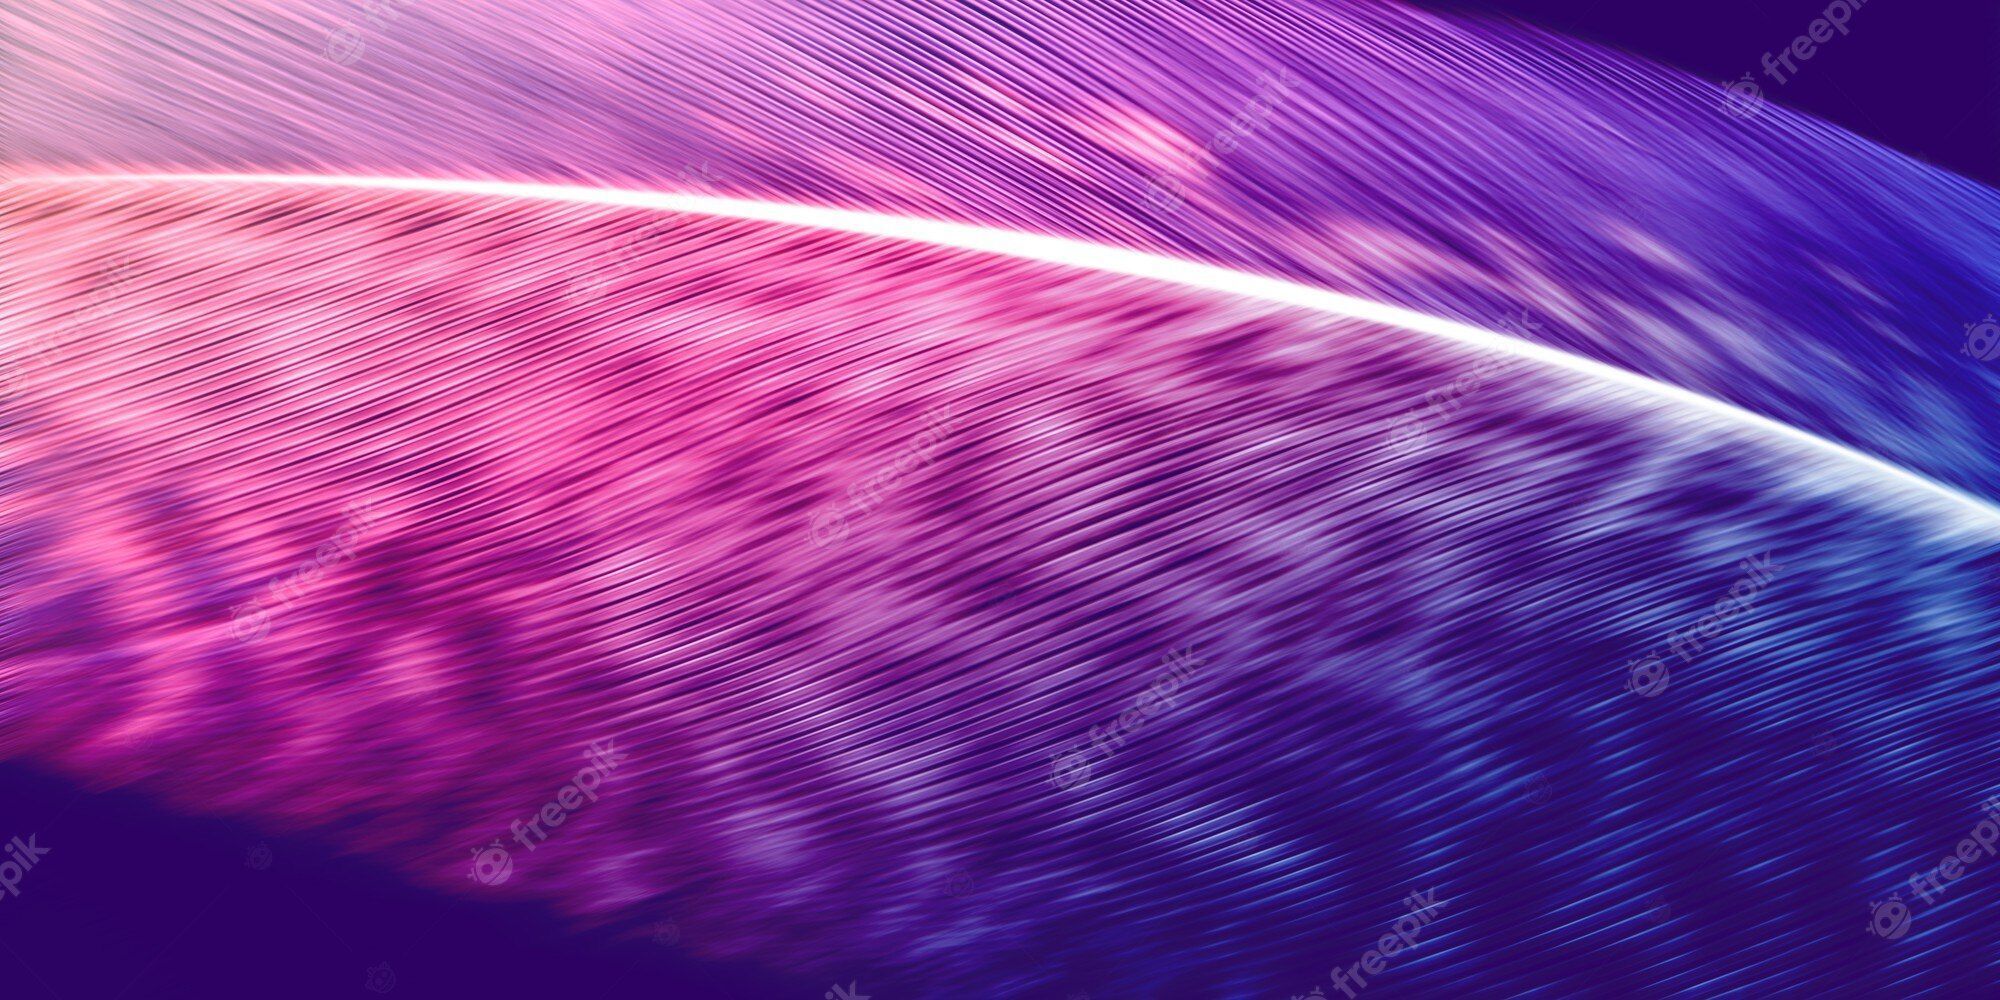 Premium Photo. Modern background for screen of your devices. synth wave, retro wave, vaporwave futuristic aesthetics. stylish flyer for ad, offer, bright colors and smoke neoned effect. design for wallpaper